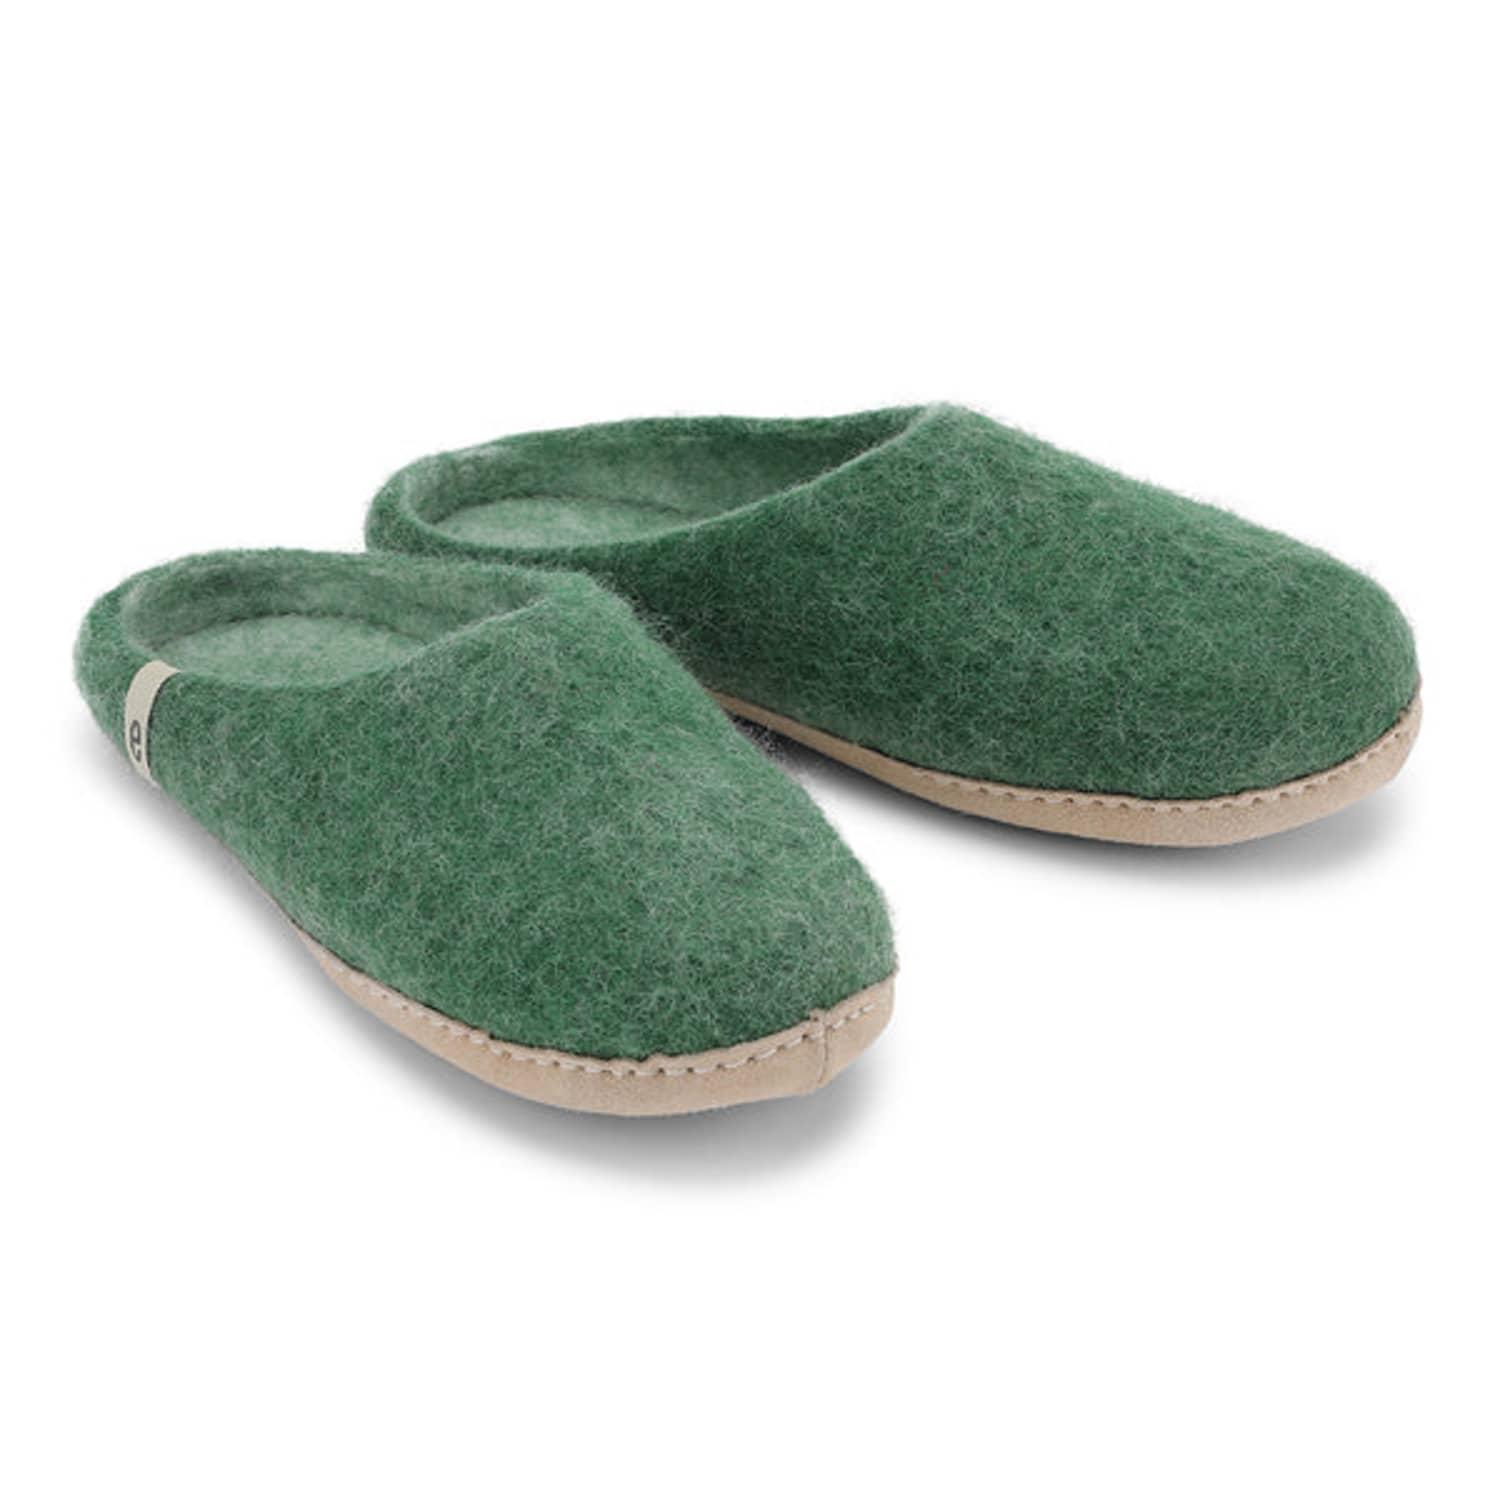 Egos Hand-made Green Felted Wool Slippers for Men | Lyst